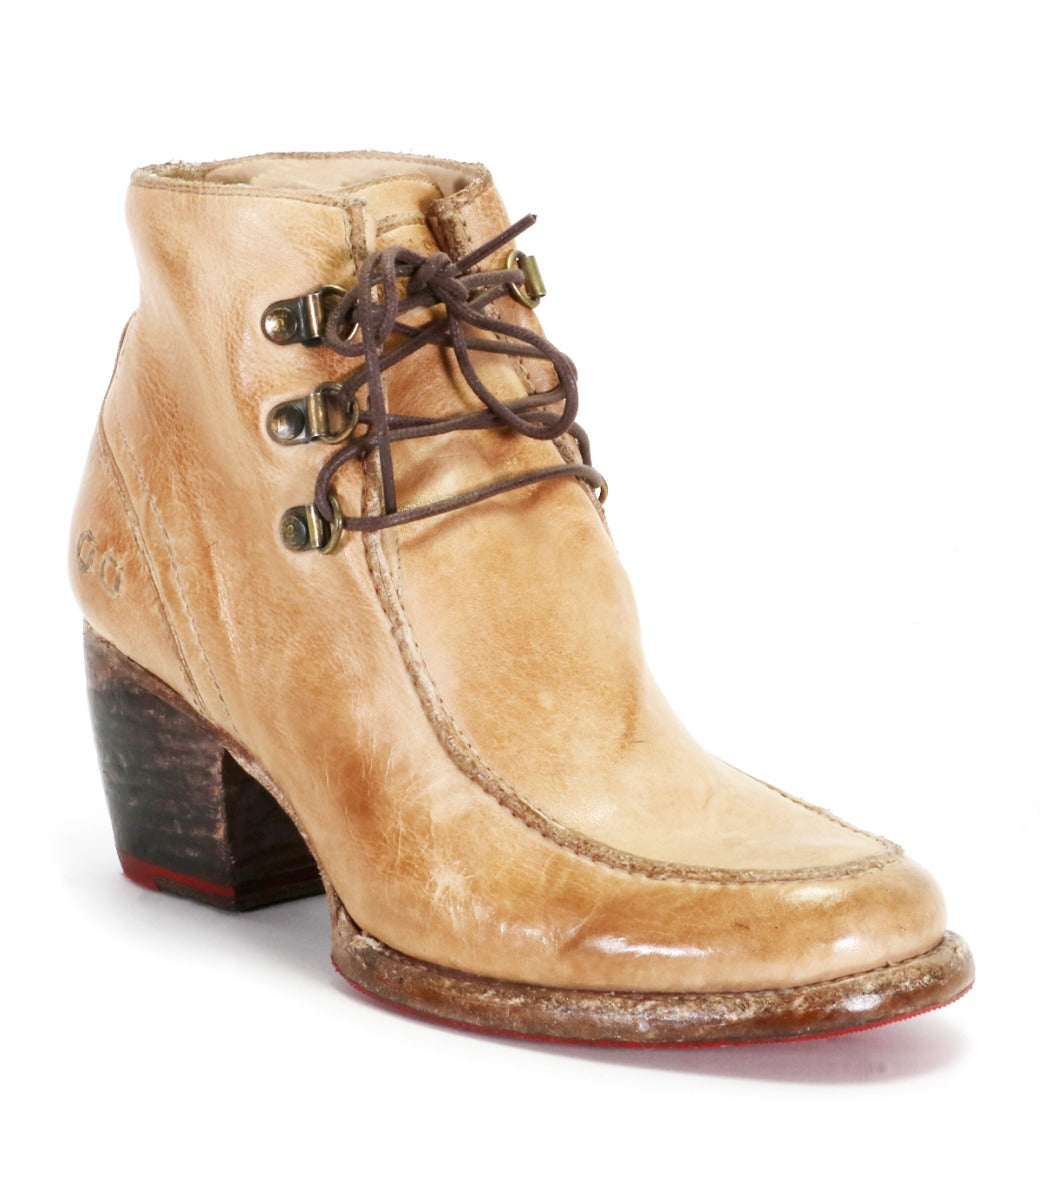 A women's tan leather ankle boot called Mage by Bed Stu.